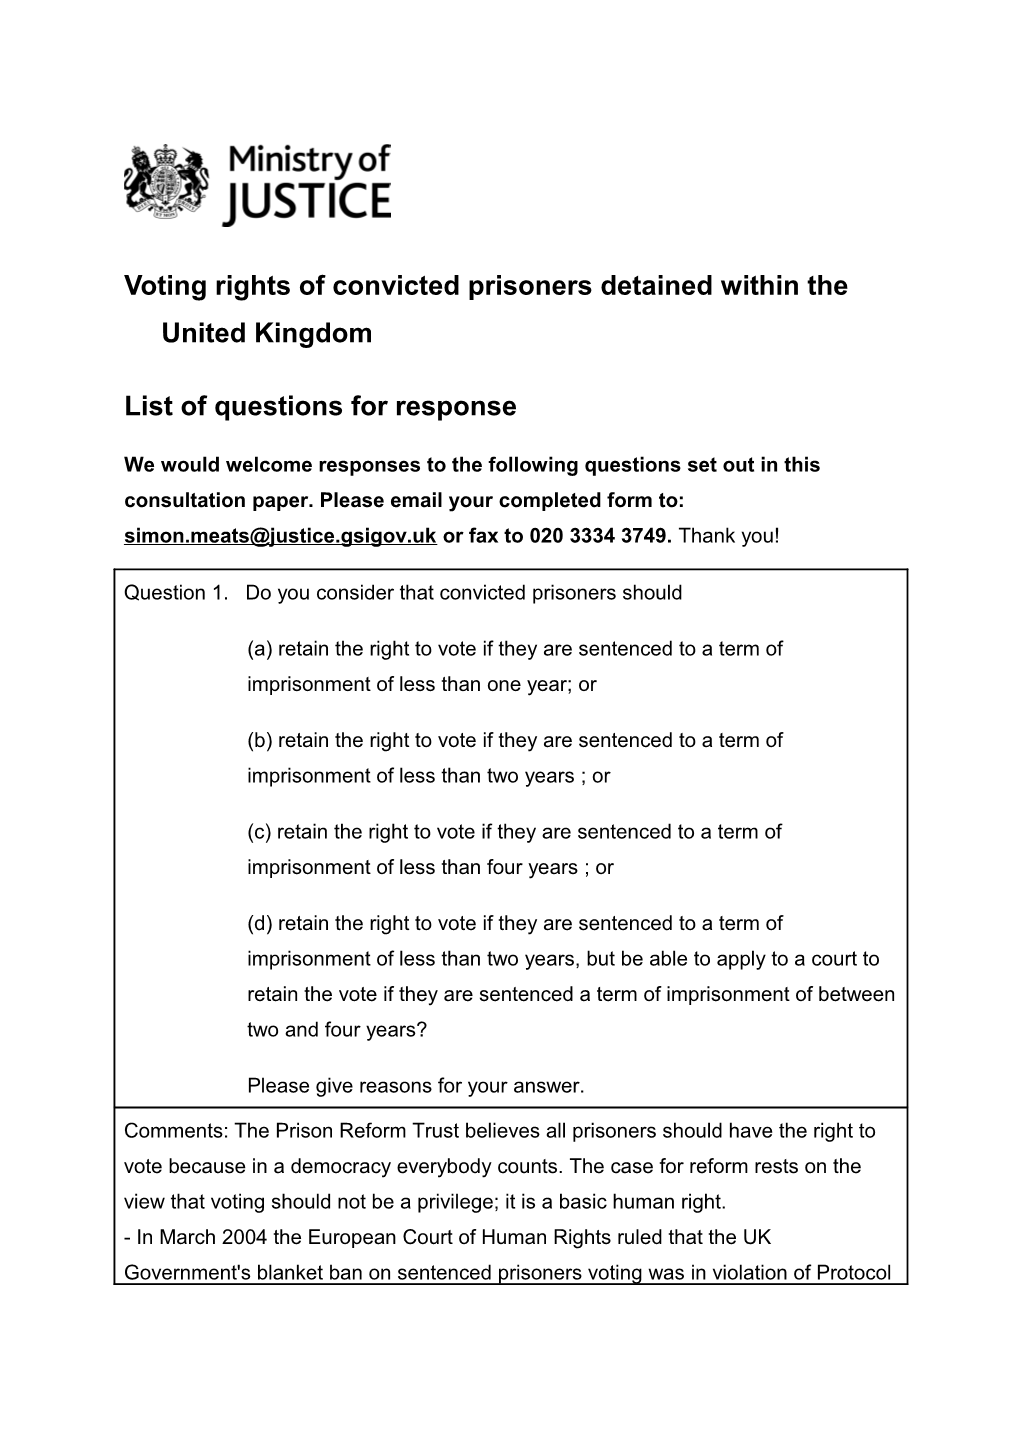 Voting Rights of Convicted Prisoners Detained Within the United Kingdom